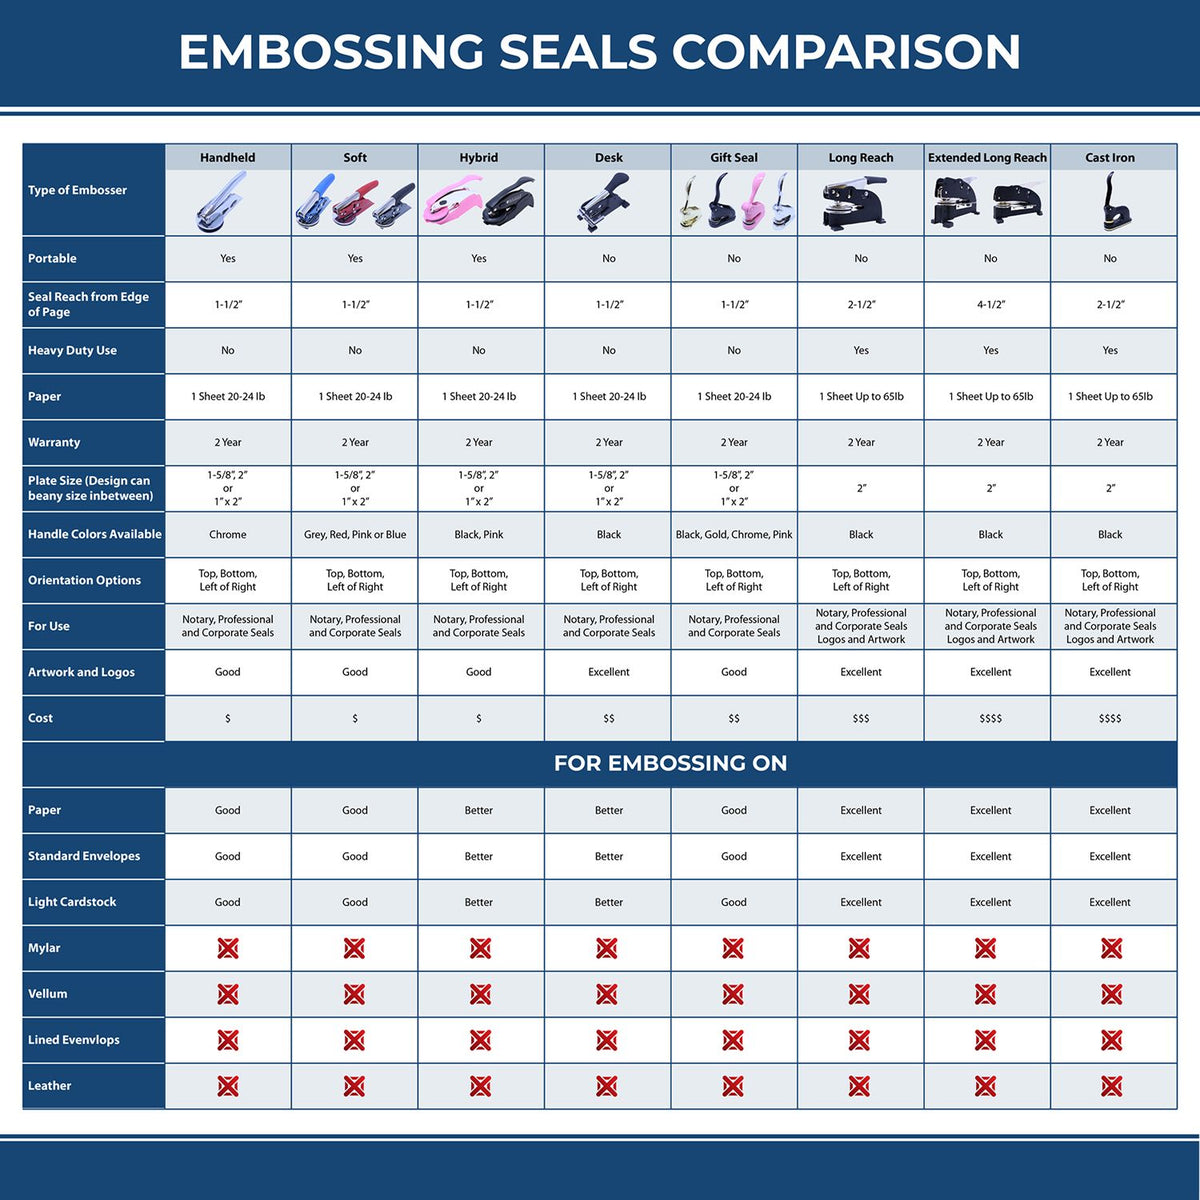 A comparison chart for the different types of mount models available for the Soft Ohio Professional Geologist Seal